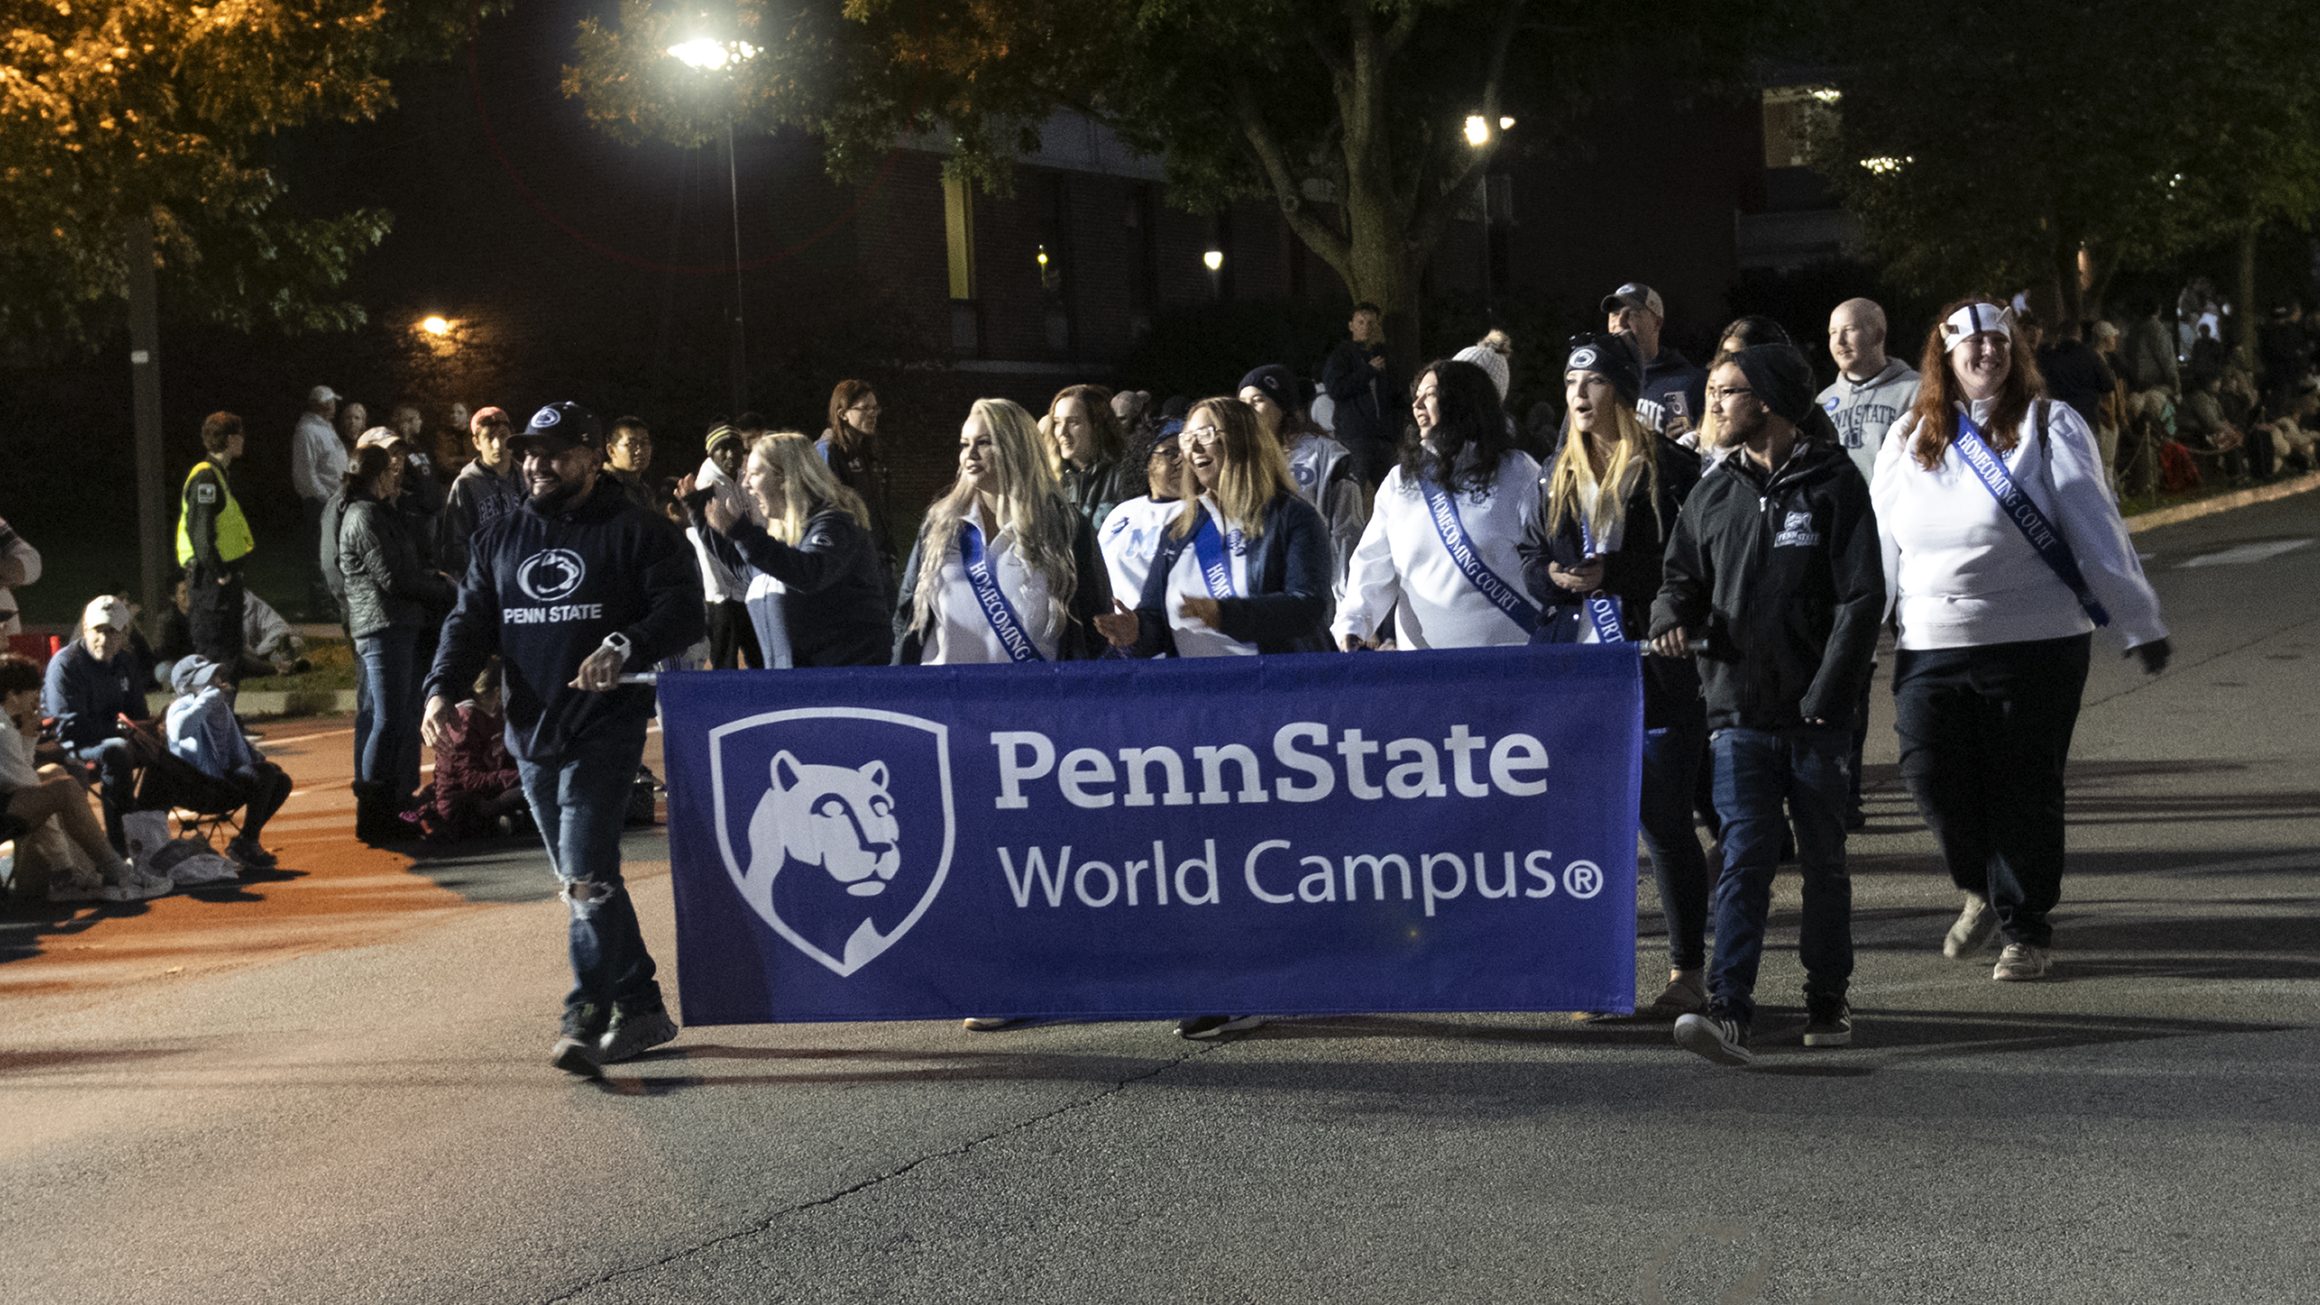 A group of people hold a blue World Campus banner in a parade at night.